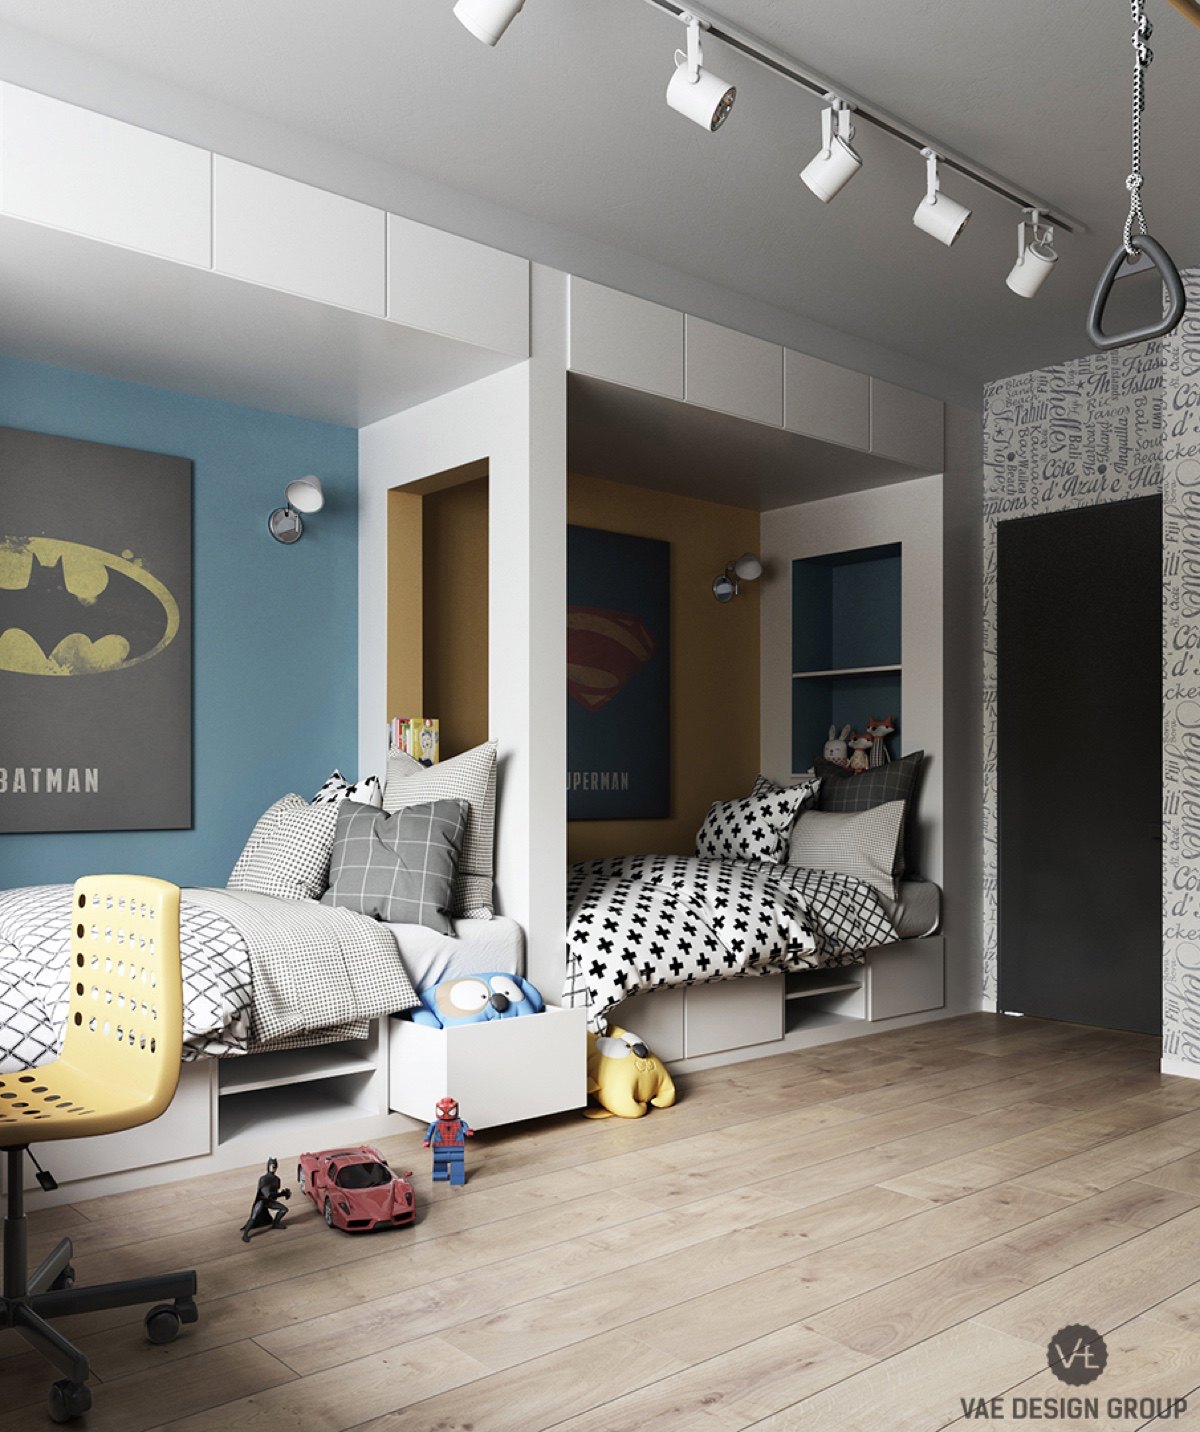 batman-and-superman-kids-bedrooms-in-one-space-space-savers